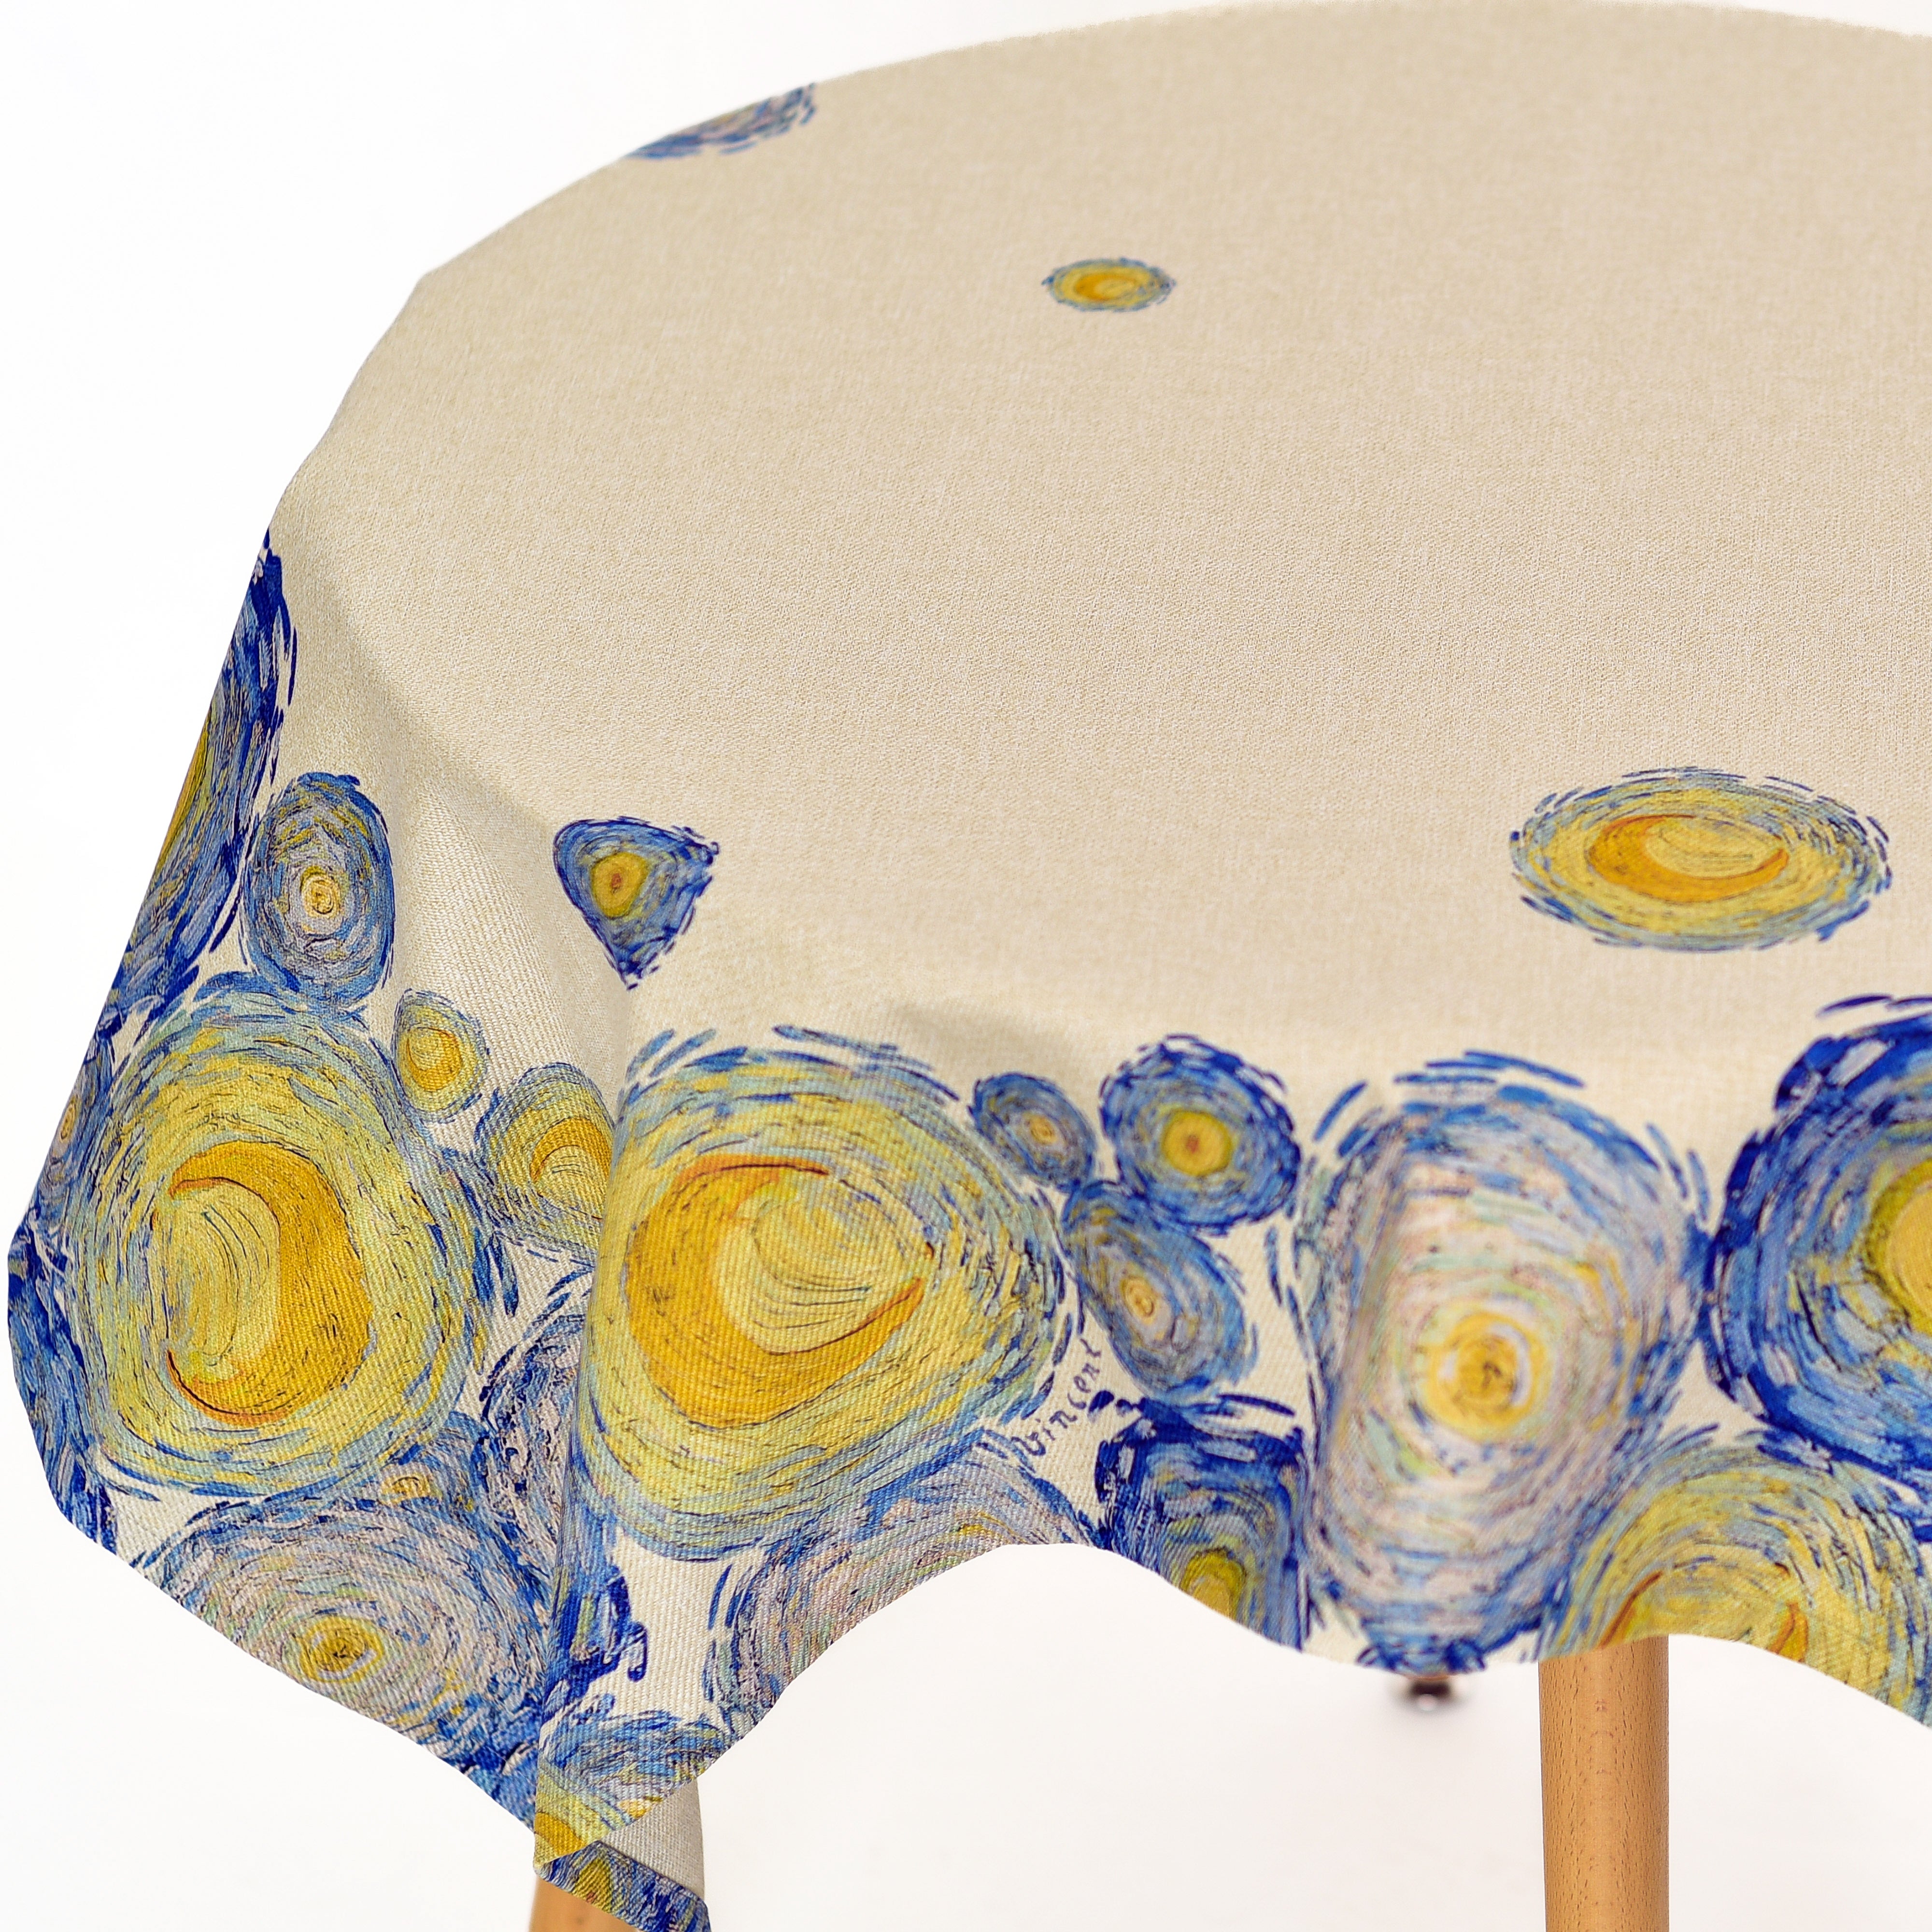 Recycled fabric tablecloth Vincent van Gogh "The Starry Night Pattern"